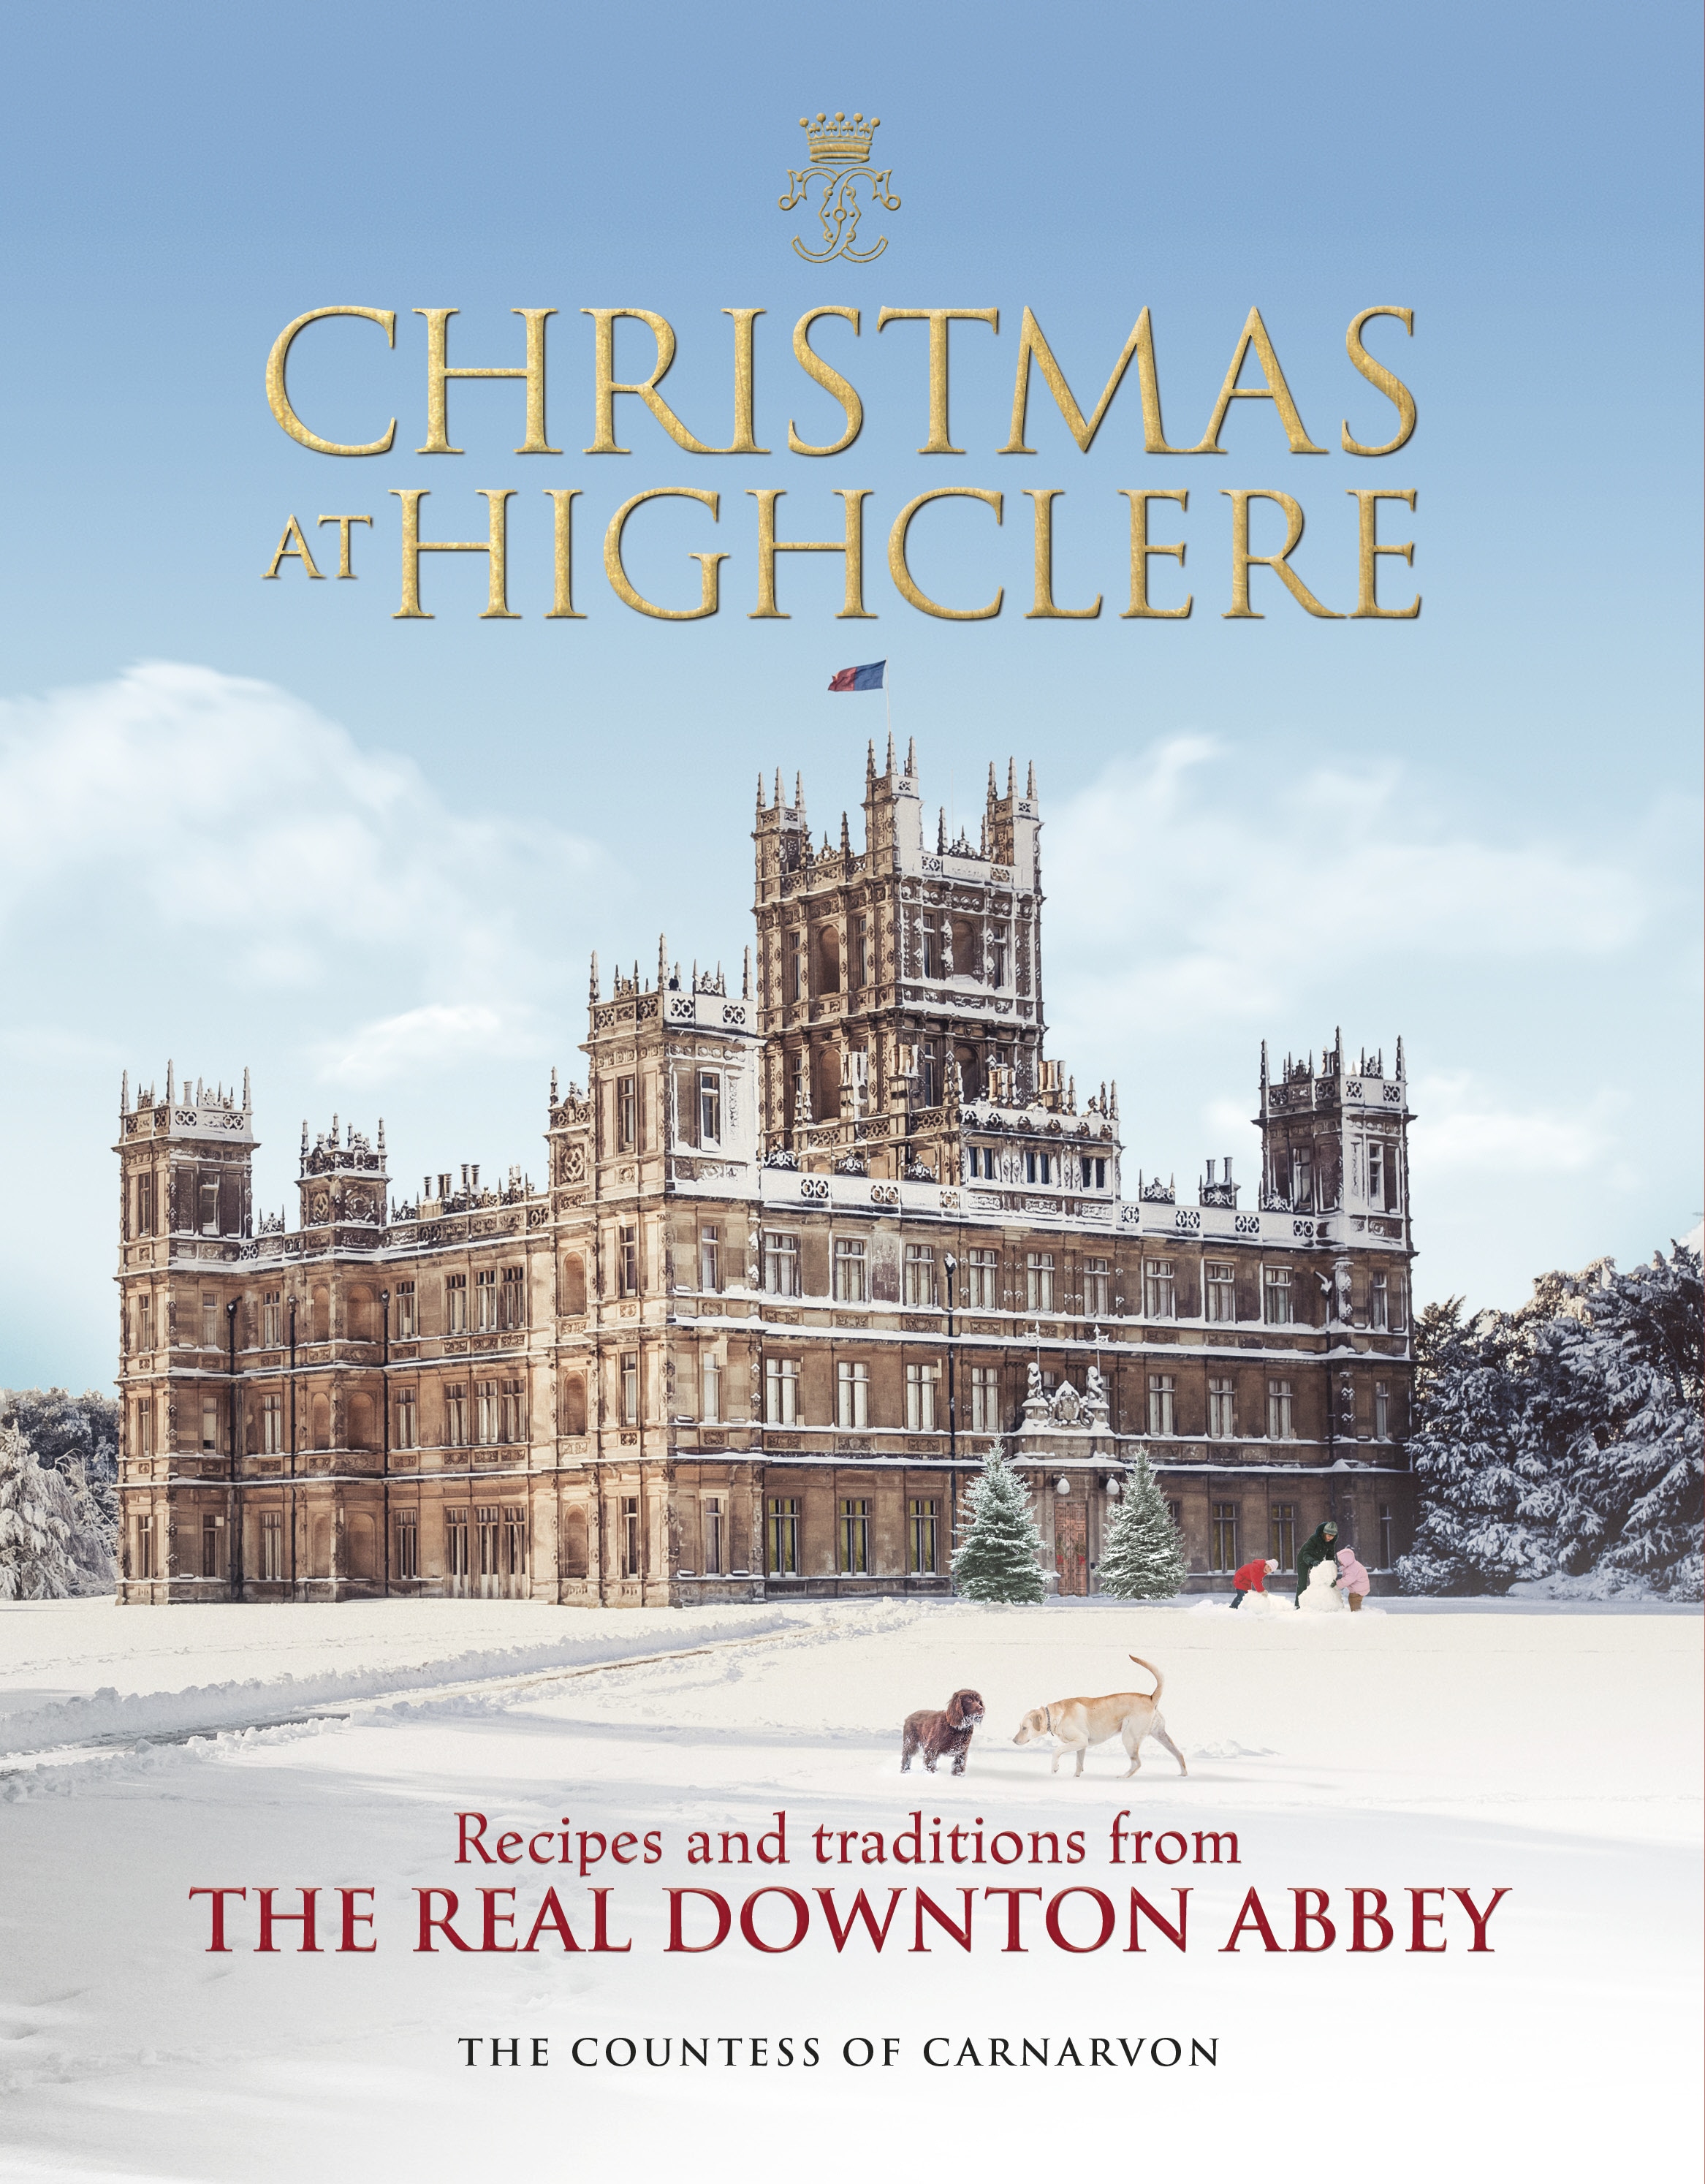 Book “Christmas at Highclere” by The Countess of Carnarvon — September 5, 2019